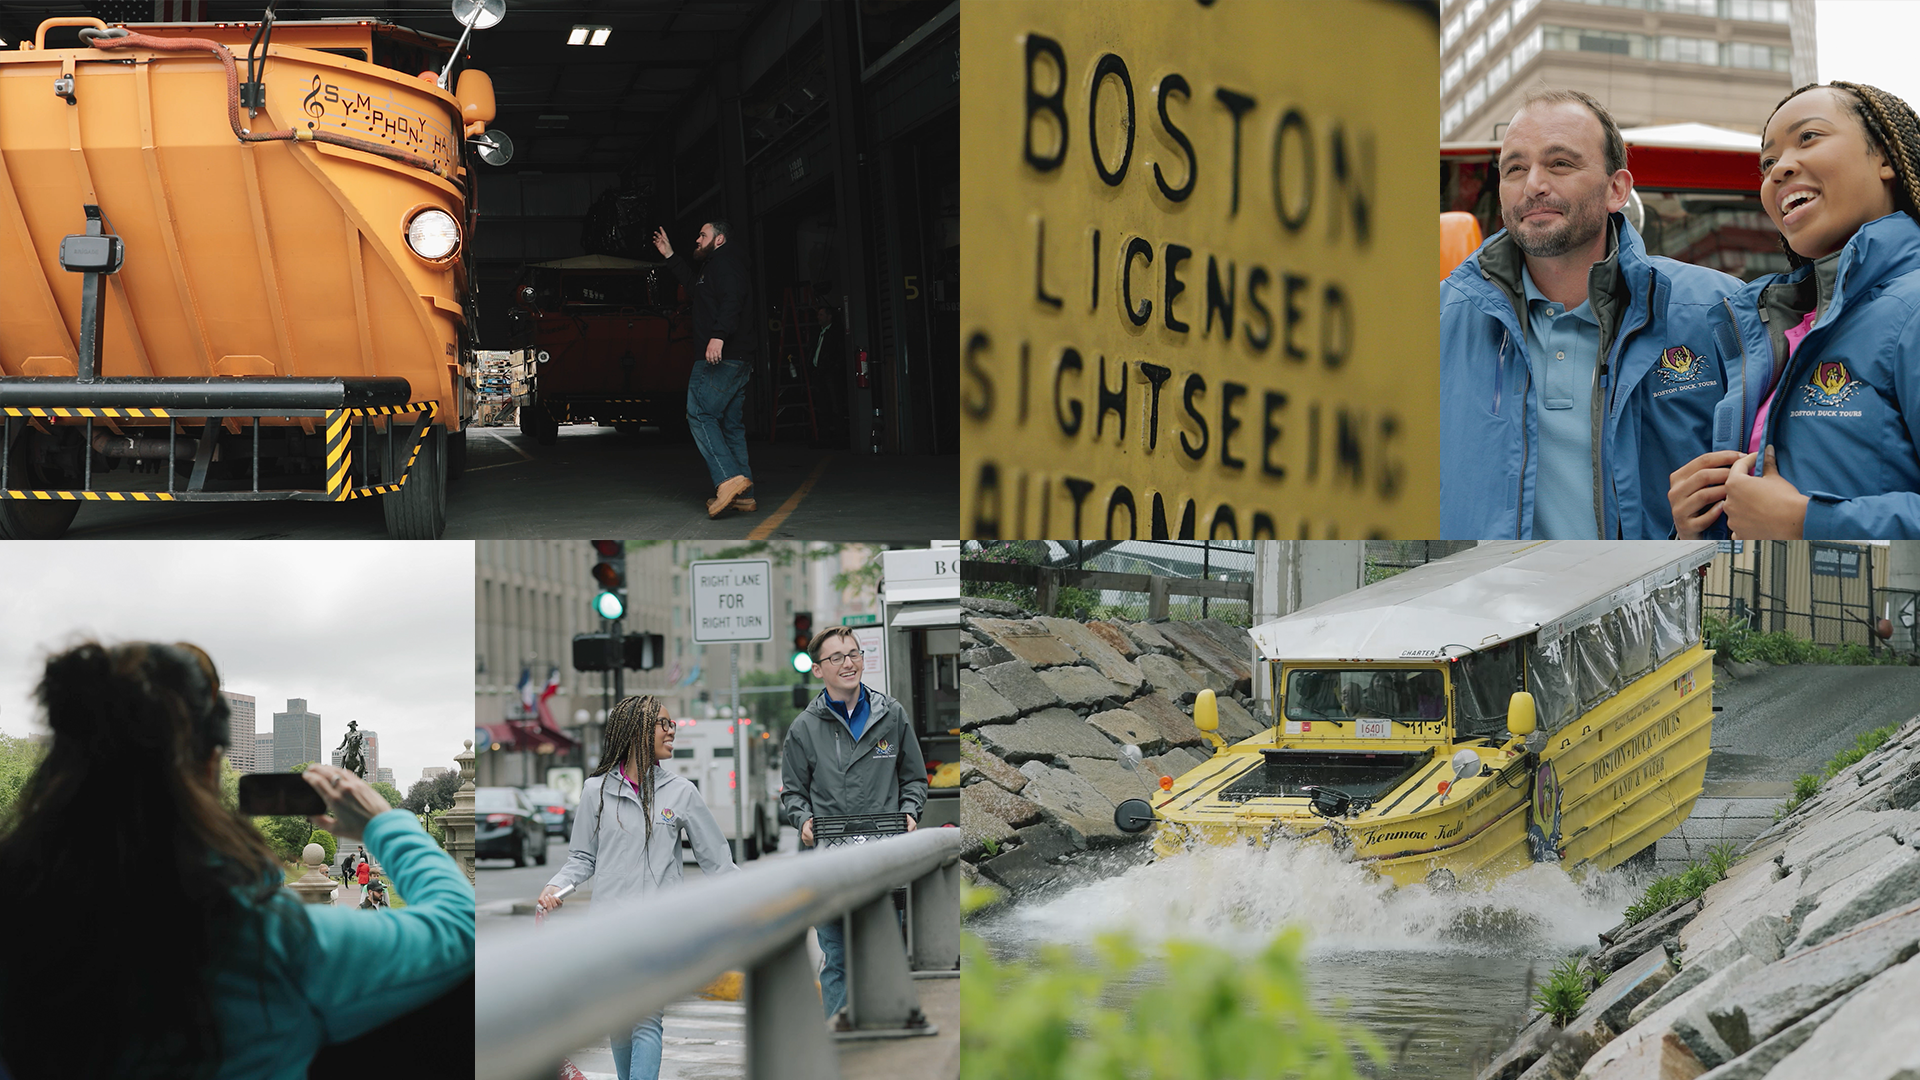 A collage of images, featuring a boat from the Boston Duck tours diving into water, a man directing a driver with a boat on a trailer, a woman taking a photo in Boston, two people walking in Boston Duck Tour jackets, and a closeup of a Boston sight seeing sign.